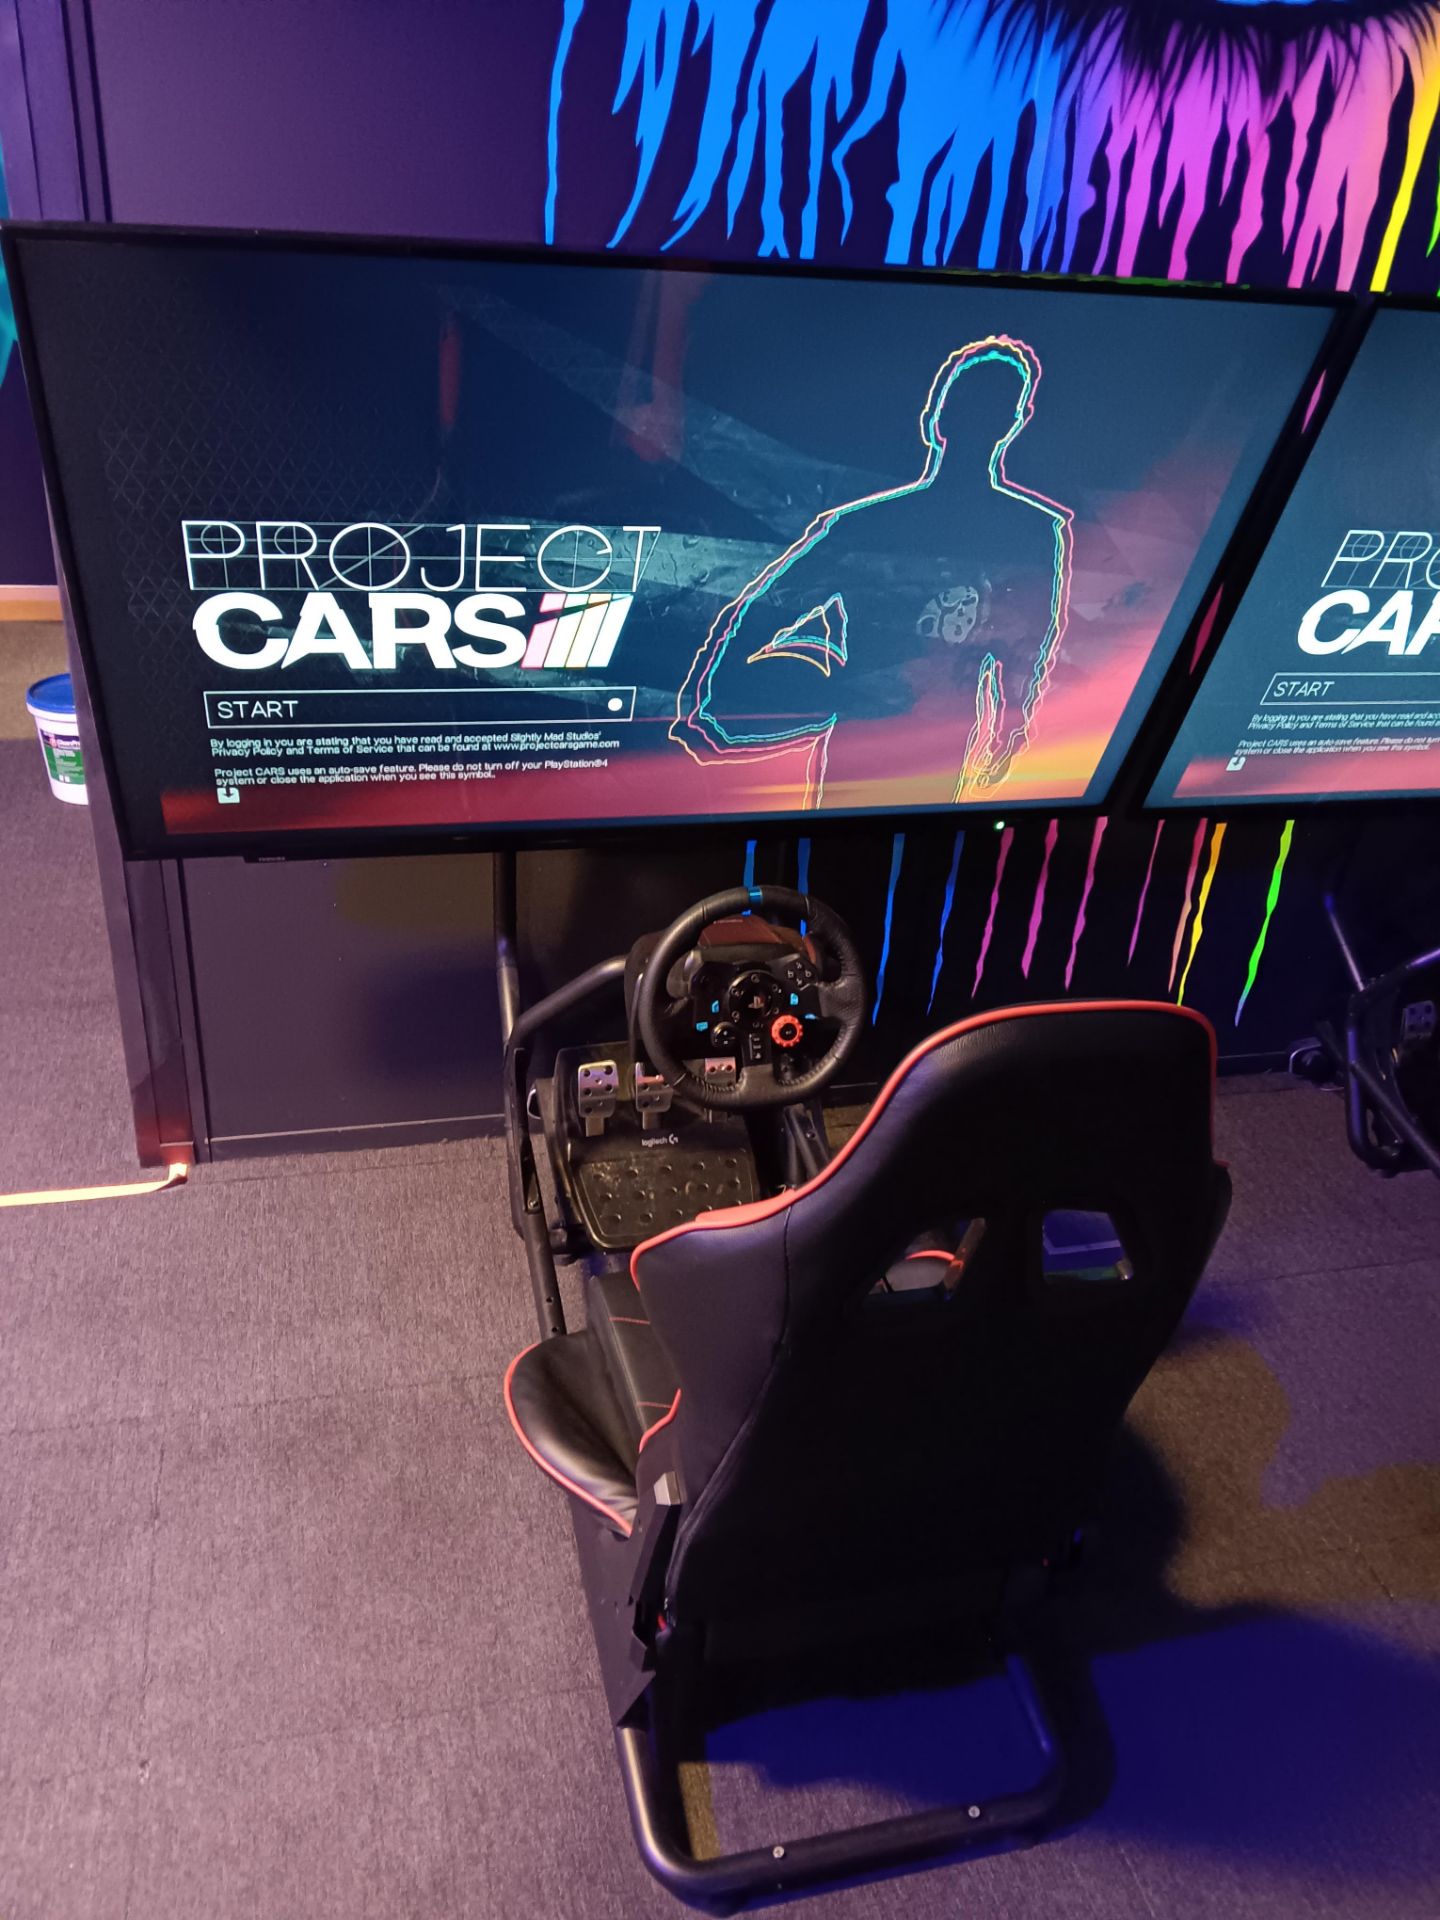 Racing Simulator Cockpit Comprising of Frame, Chair, Logitech Racing Pedals, PlayStation Racing